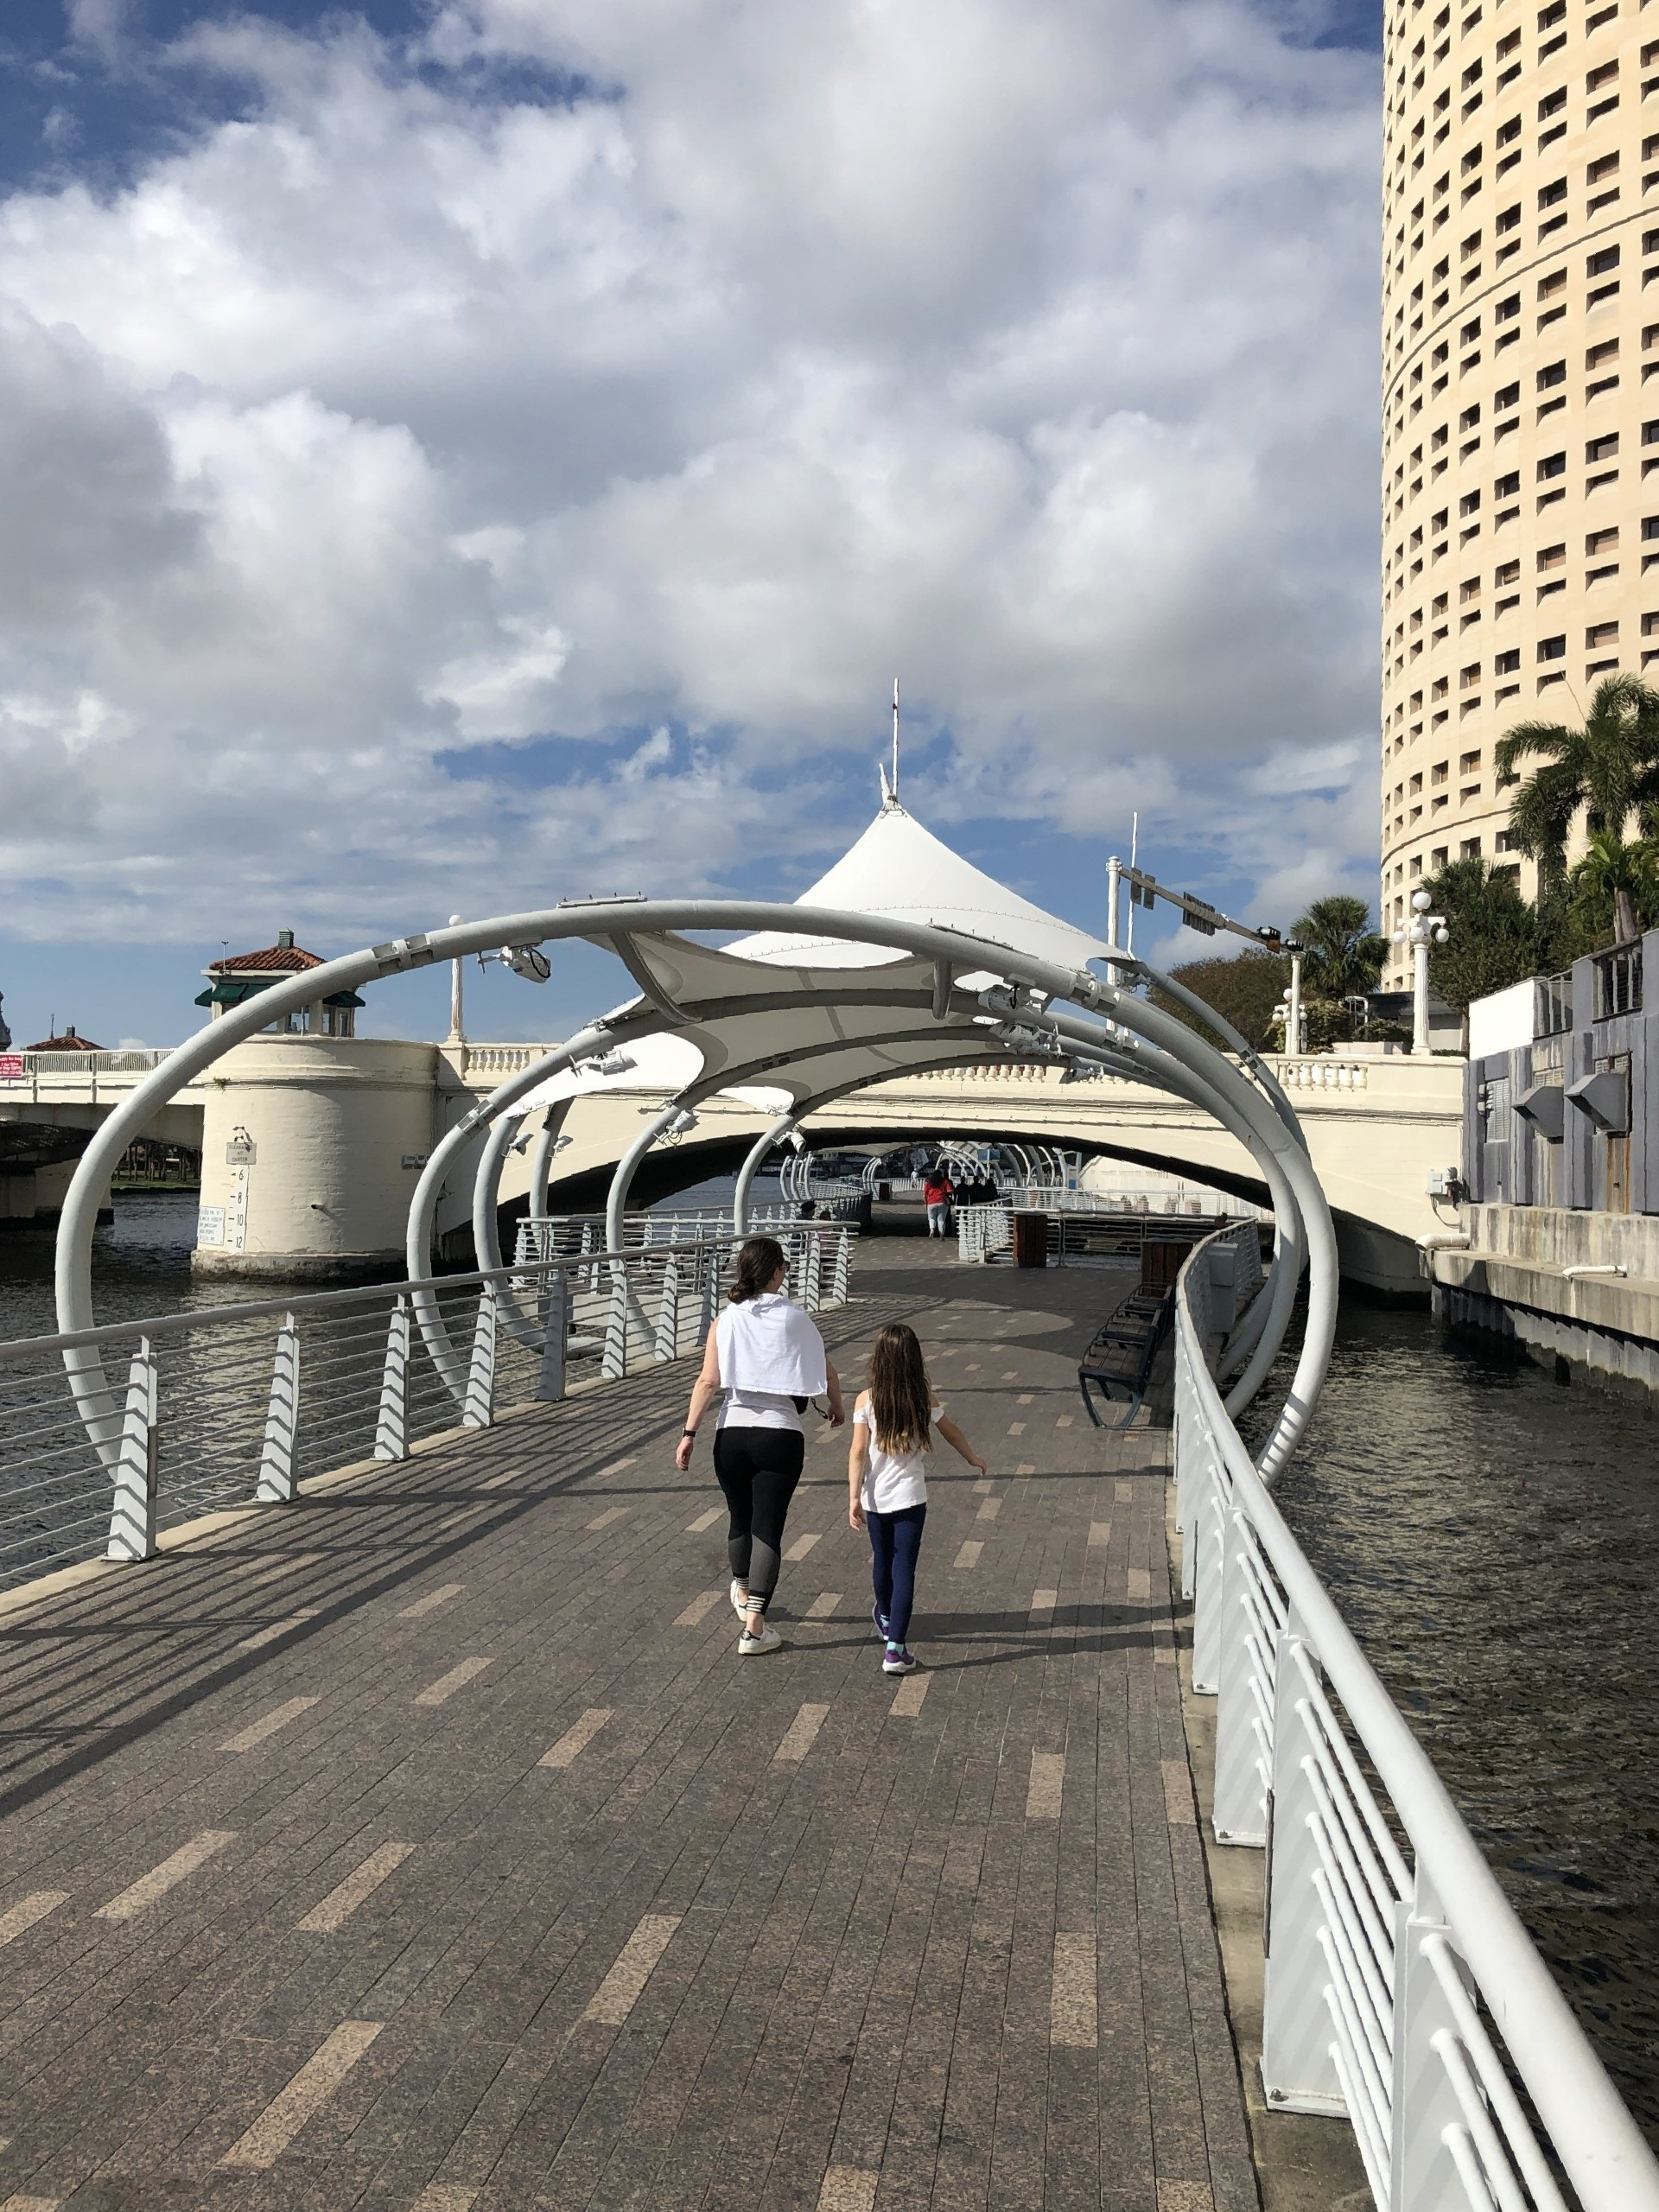 Downtown Tampa with Riverwalk along the Hillsborough River, waterfront view, and the distinctive Sykes building